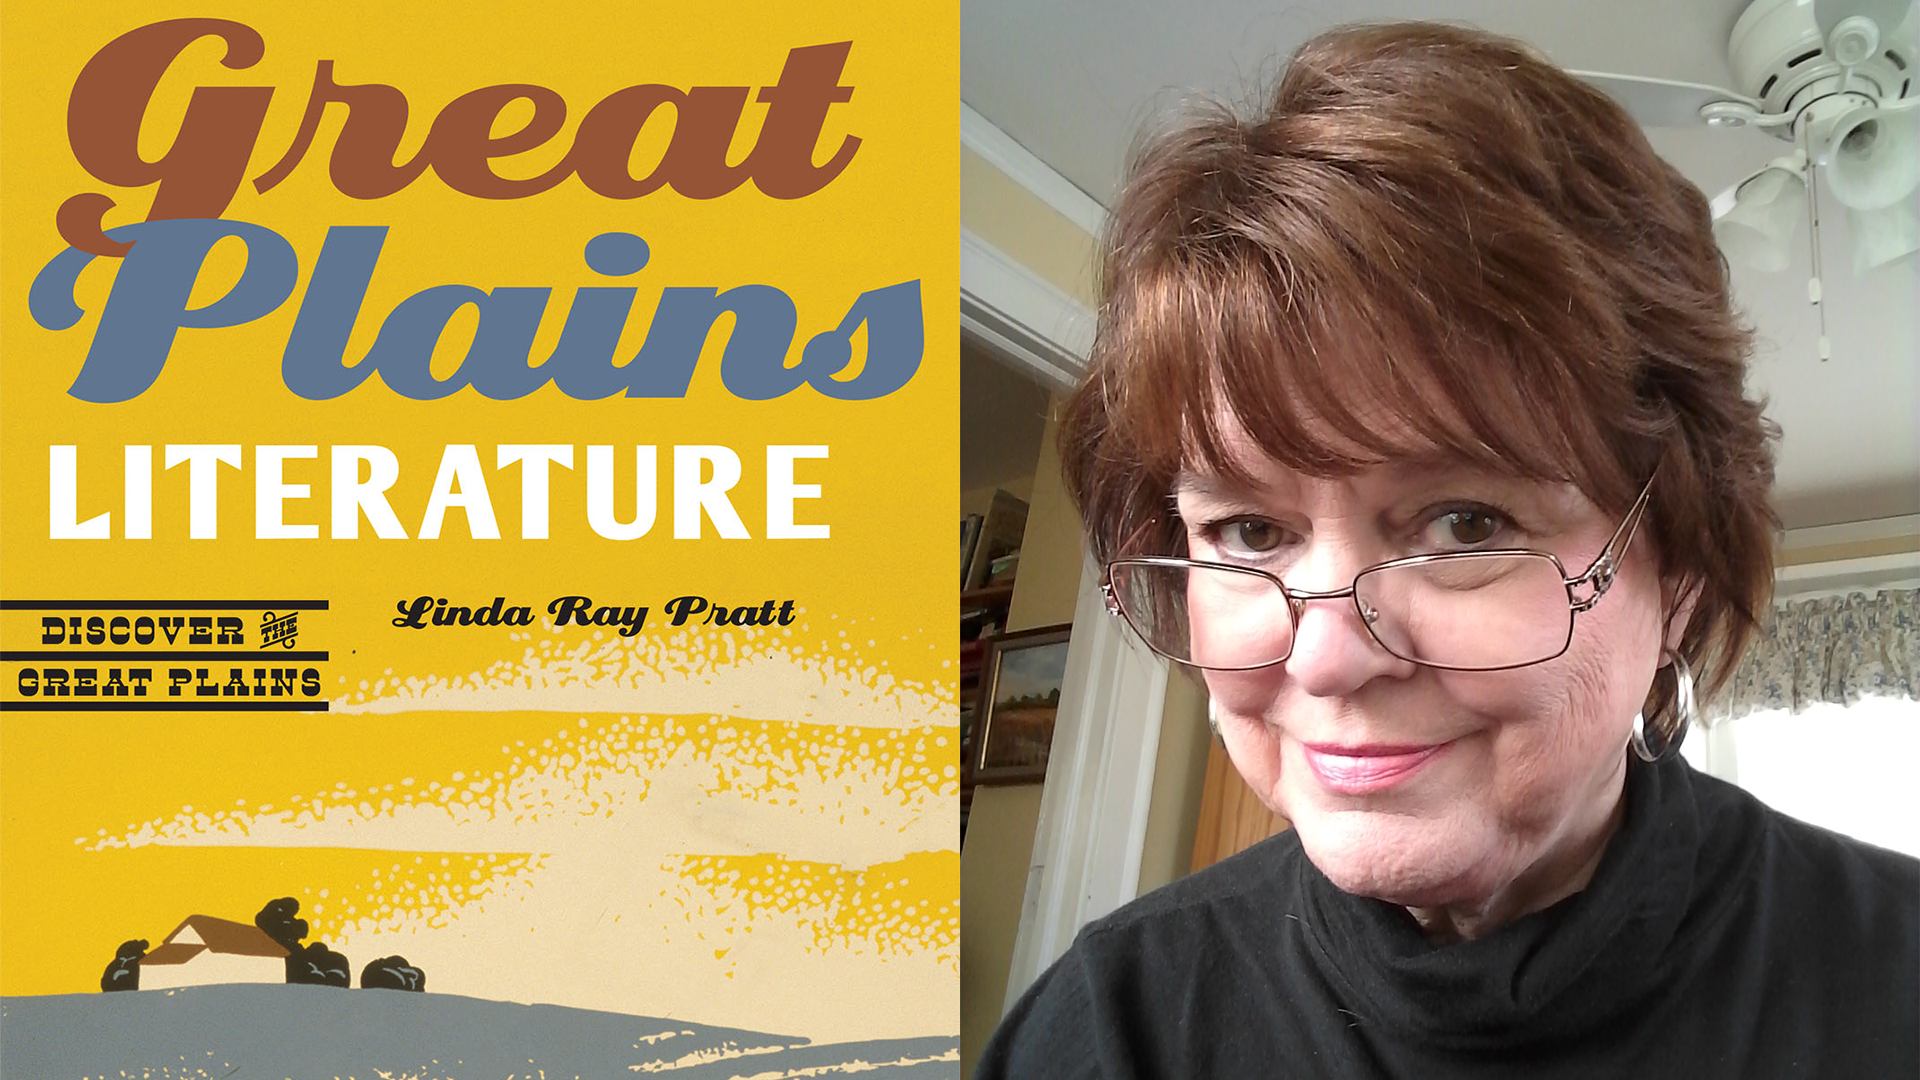 Linda Pratt and the cover of GREAT PLAINS LITERATURE; links to news story